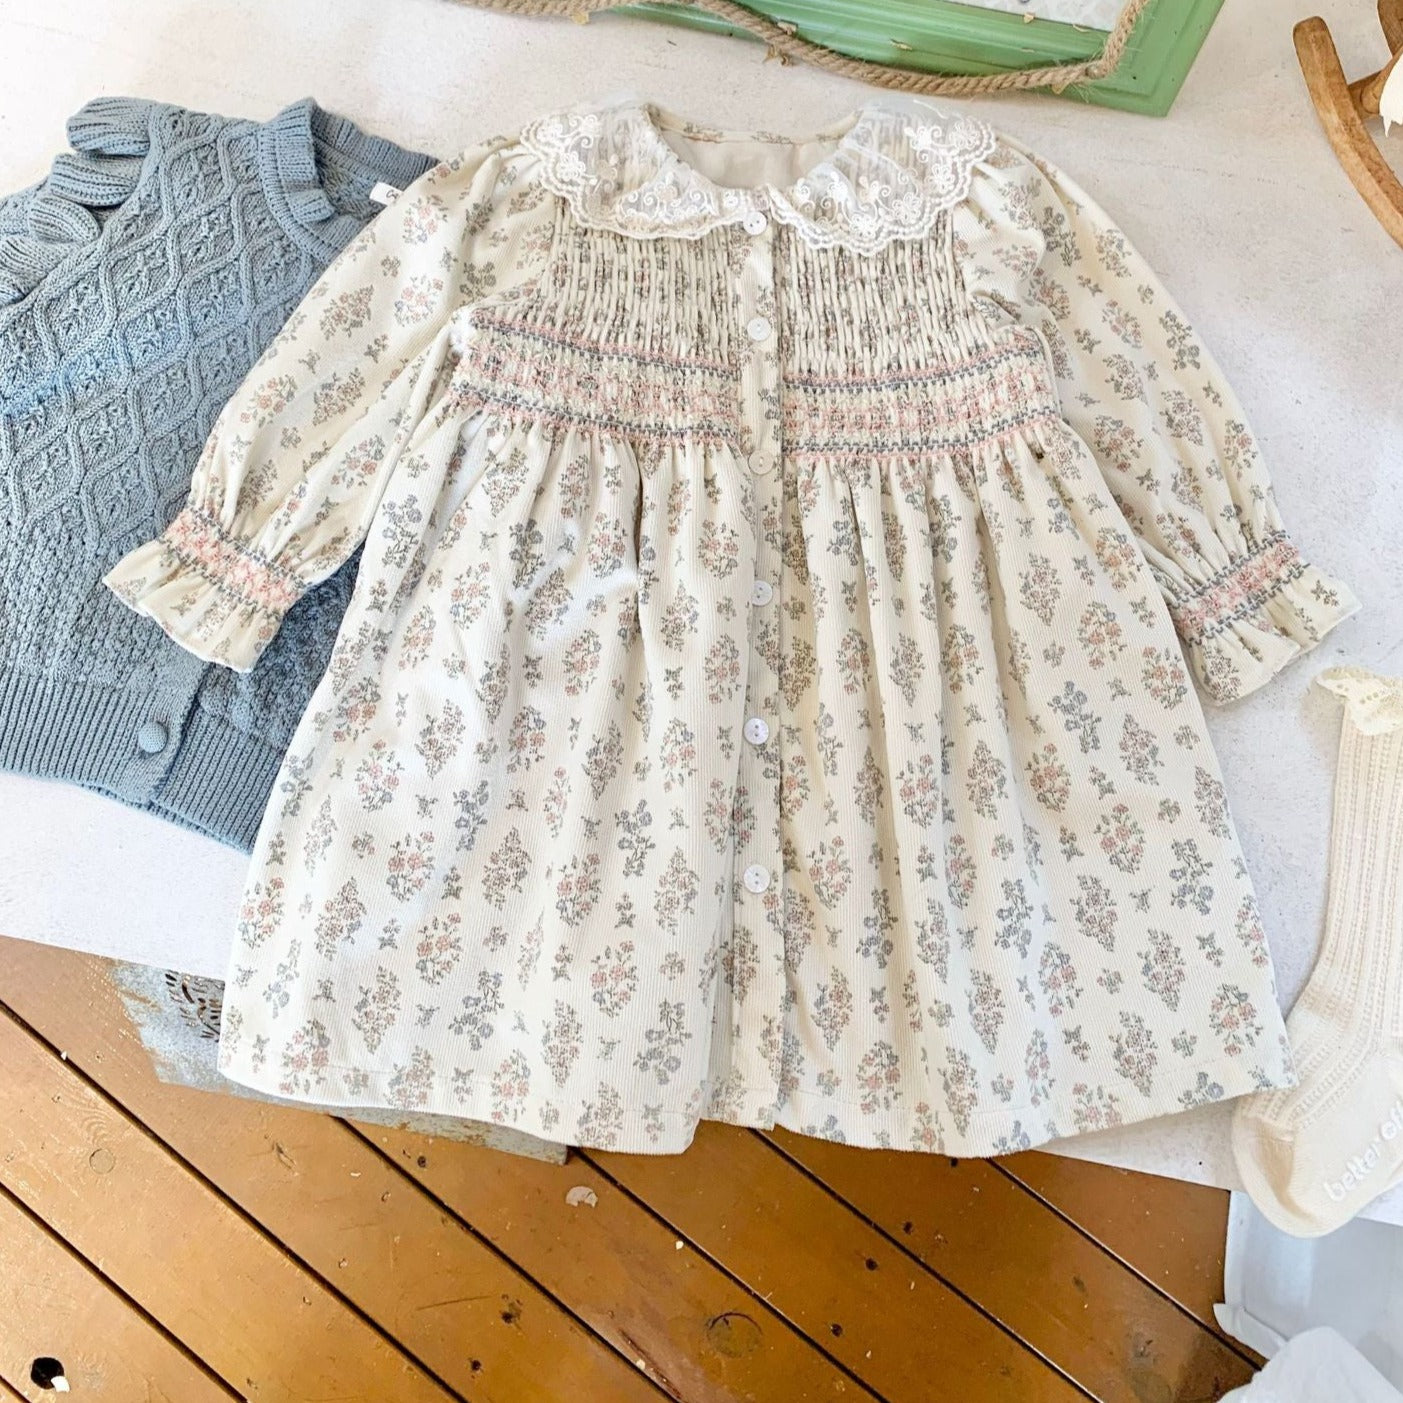 Embroidered Floral Dress With Lace Collar,12M to 5T